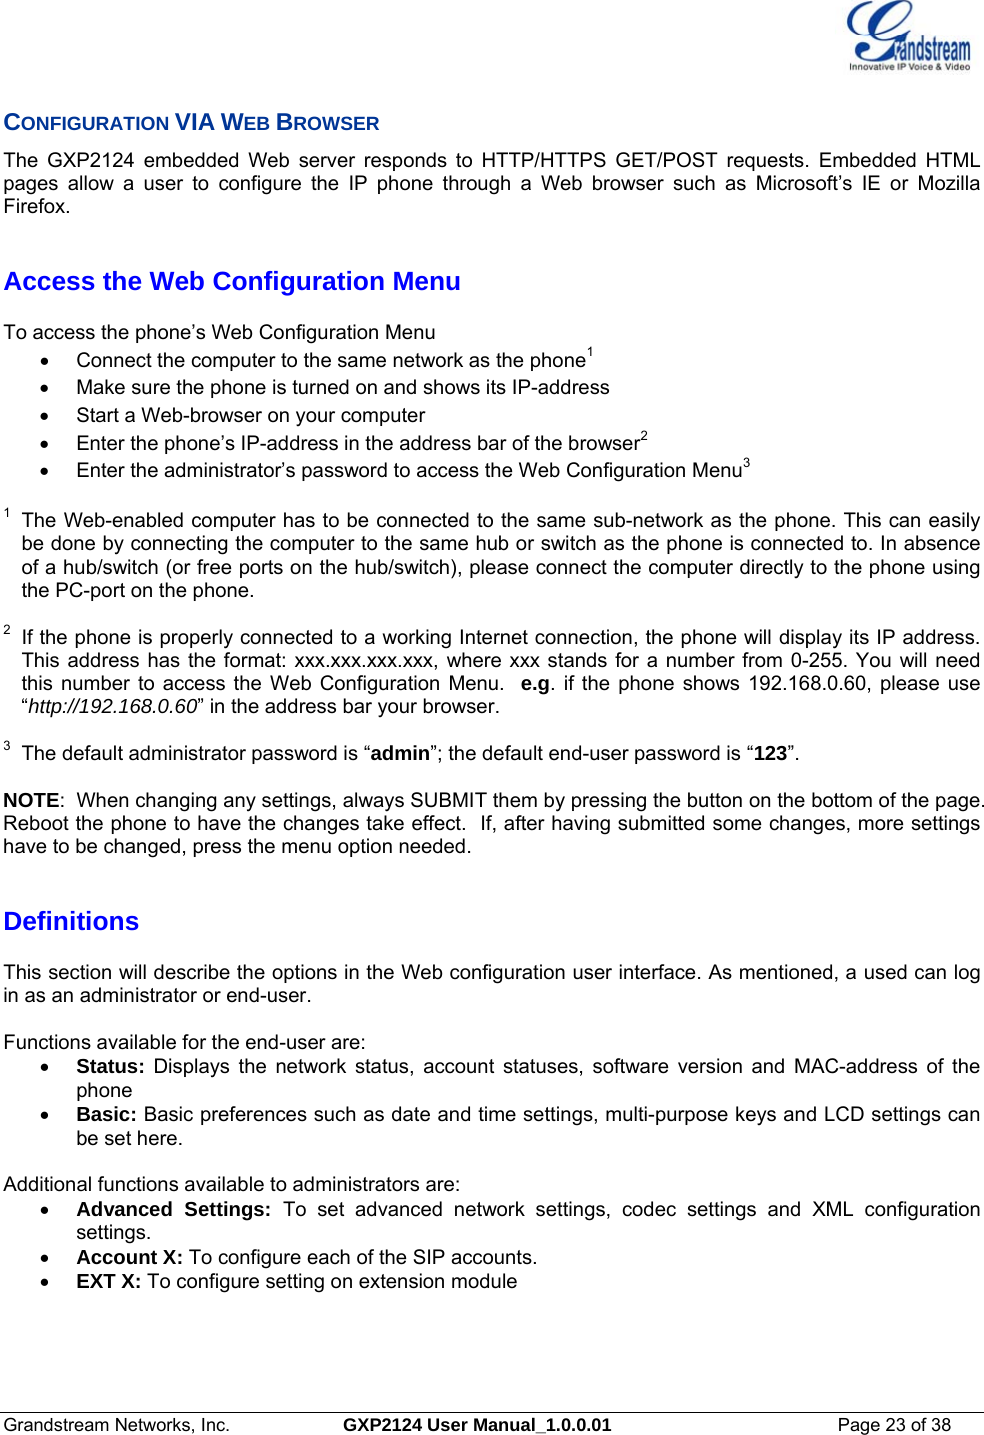  Grandstream Networks, Inc.  GXP2124 User Manual_1.0.0.01  Page 23 of 38                                                                                                                      CONFIGURATION VIA WEB BROWSER The GXP2124 embedded Web server responds to HTTP/HTTPS GET/POST requests. Embedded HTML pages allow a user to configure the IP phone through a Web browser such as Microsoft’s IE or Mozilla Firefox.   Access the Web Configuration Menu  To access the phone’s Web Configuration Menu •  Connect the computer to the same network as the phone1 •  Make sure the phone is turned on and shows its IP-address •  Start a Web-browser on your computer •  Enter the phone’s IP-address in the address bar of the browser2 •  Enter the administrator’s password to access the Web Configuration Menu3  1  The Web-enabled computer has to be connected to the same sub-network as the phone. This can easily be done by connecting the computer to the same hub or switch as the phone is connected to. In absence of a hub/switch (or free ports on the hub/switch), please connect the computer directly to the phone using the PC-port on the phone.   2  If the phone is properly connected to a working Internet connection, the phone will display its IP address. This address has the format: xxx.xxx.xxx.xxx, where xxx stands for a number from 0-255. You will need this number to access the Web Configuration Menu.  e.g. if the phone shows 192.168.0.60, please use “http://192.168.0.60” in the address bar your browser.  3  The default administrator password is “admin”; the default end-user password is “123”.  NOTE:  When changing any settings, always SUBMIT them by pressing the button on the bottom of the page. Reboot the phone to have the changes take effect.  If, after having submitted some changes, more settings have to be changed, press the menu option needed.    Definitions  This section will describe the options in the Web configuration user interface. As mentioned, a used can log in as an administrator or end-user.   Functions available for the end-user are: • Status: Displays the network status, account statuses, software version and MAC-address of the phone • Basic: Basic preferences such as date and time settings, multi-purpose keys and LCD settings can be set here.  Additional functions available to administrators are: • Advanced Settings: To set advanced network settings, codec settings and XML configuration settings.  • Account X: To configure each of the SIP accounts.  • EXT X: To configure setting on extension module  